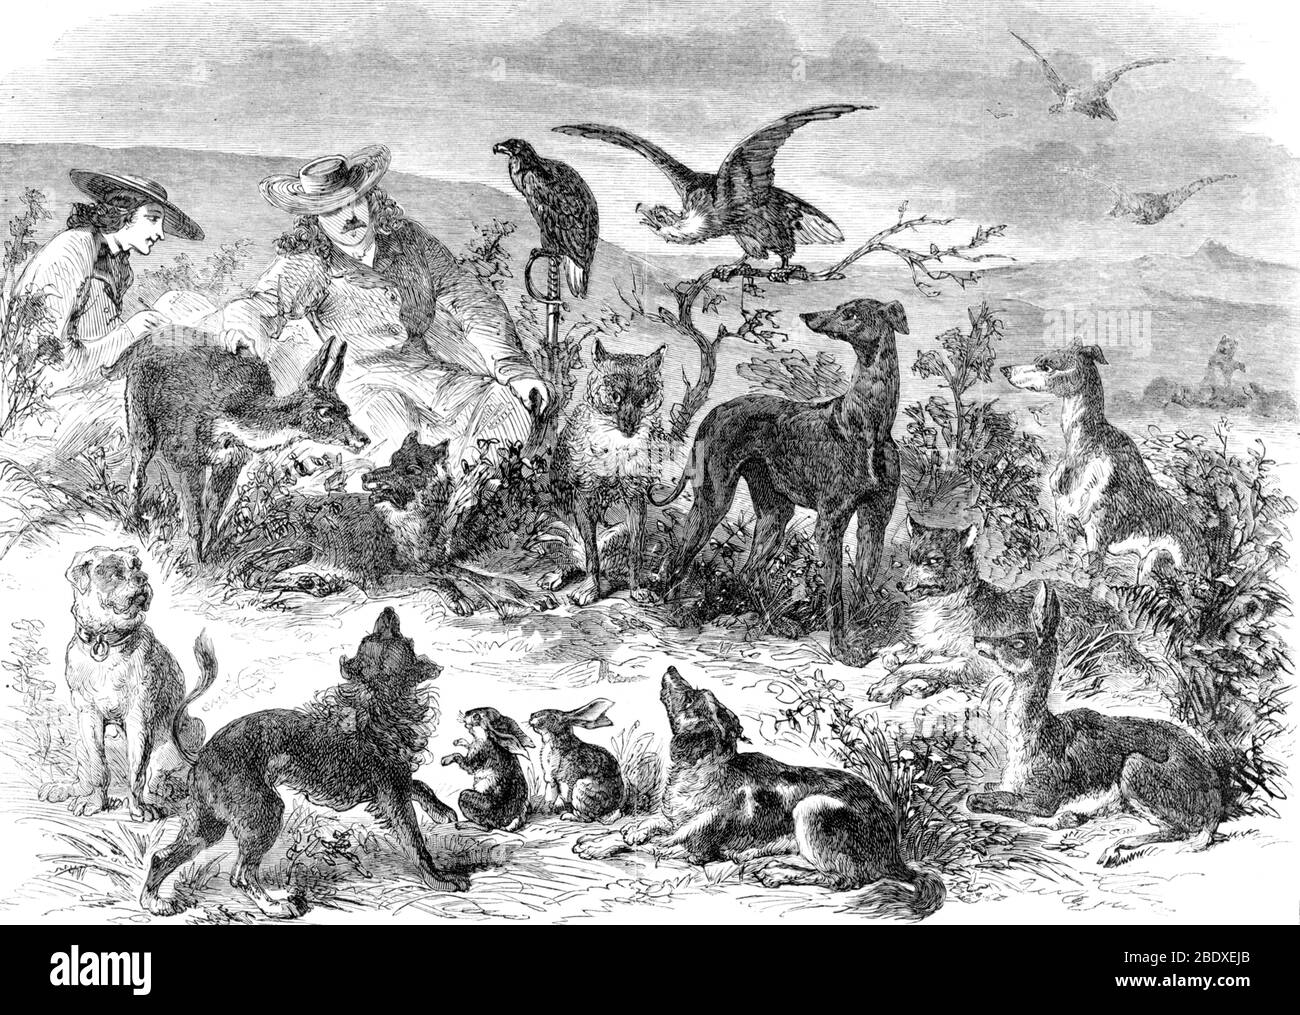 Red Cloud's War, 7th Cavalry Regiment Pets, 1867 Stock Photo